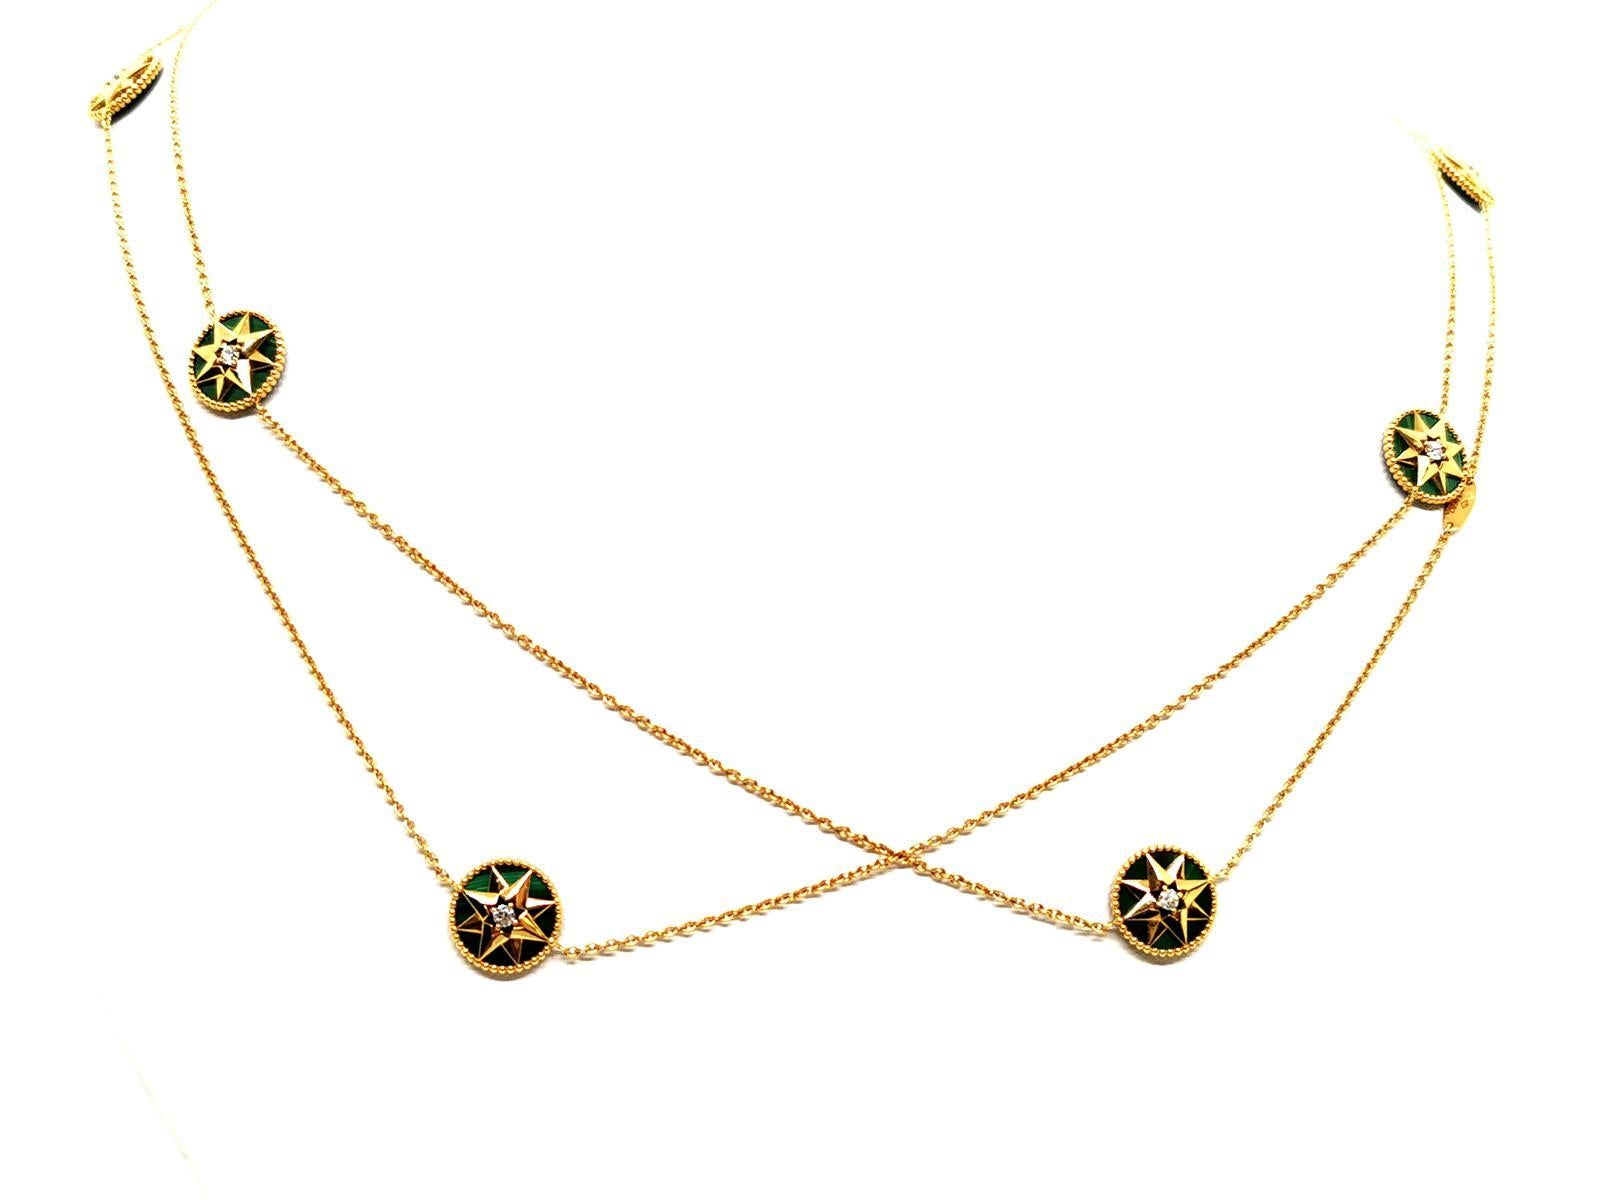 Dior Chain Necklace Rose Des Vents Yellow Gold Diamond 7